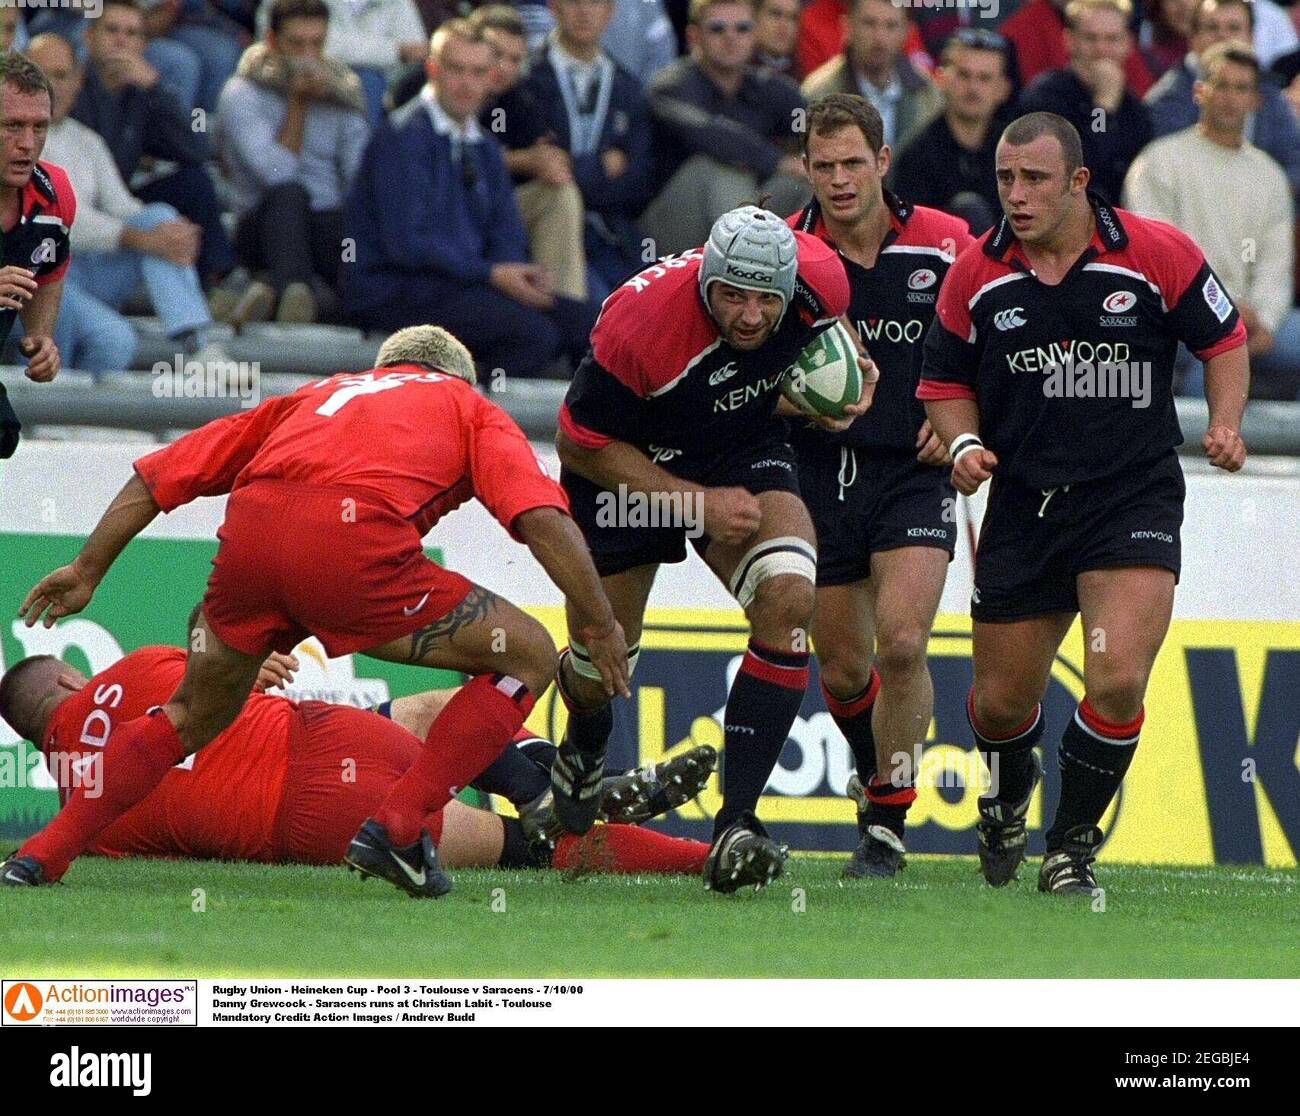 Rugby Union - Heineken Cup - Pool 3 - Toulouse v Saracens - 7/10/00 Danny  Grewcock - Saracens runs at Christian Labit - Toulouse Mandatory Credit:  Action Images / Andrew Budd Stock Photo - Alamy